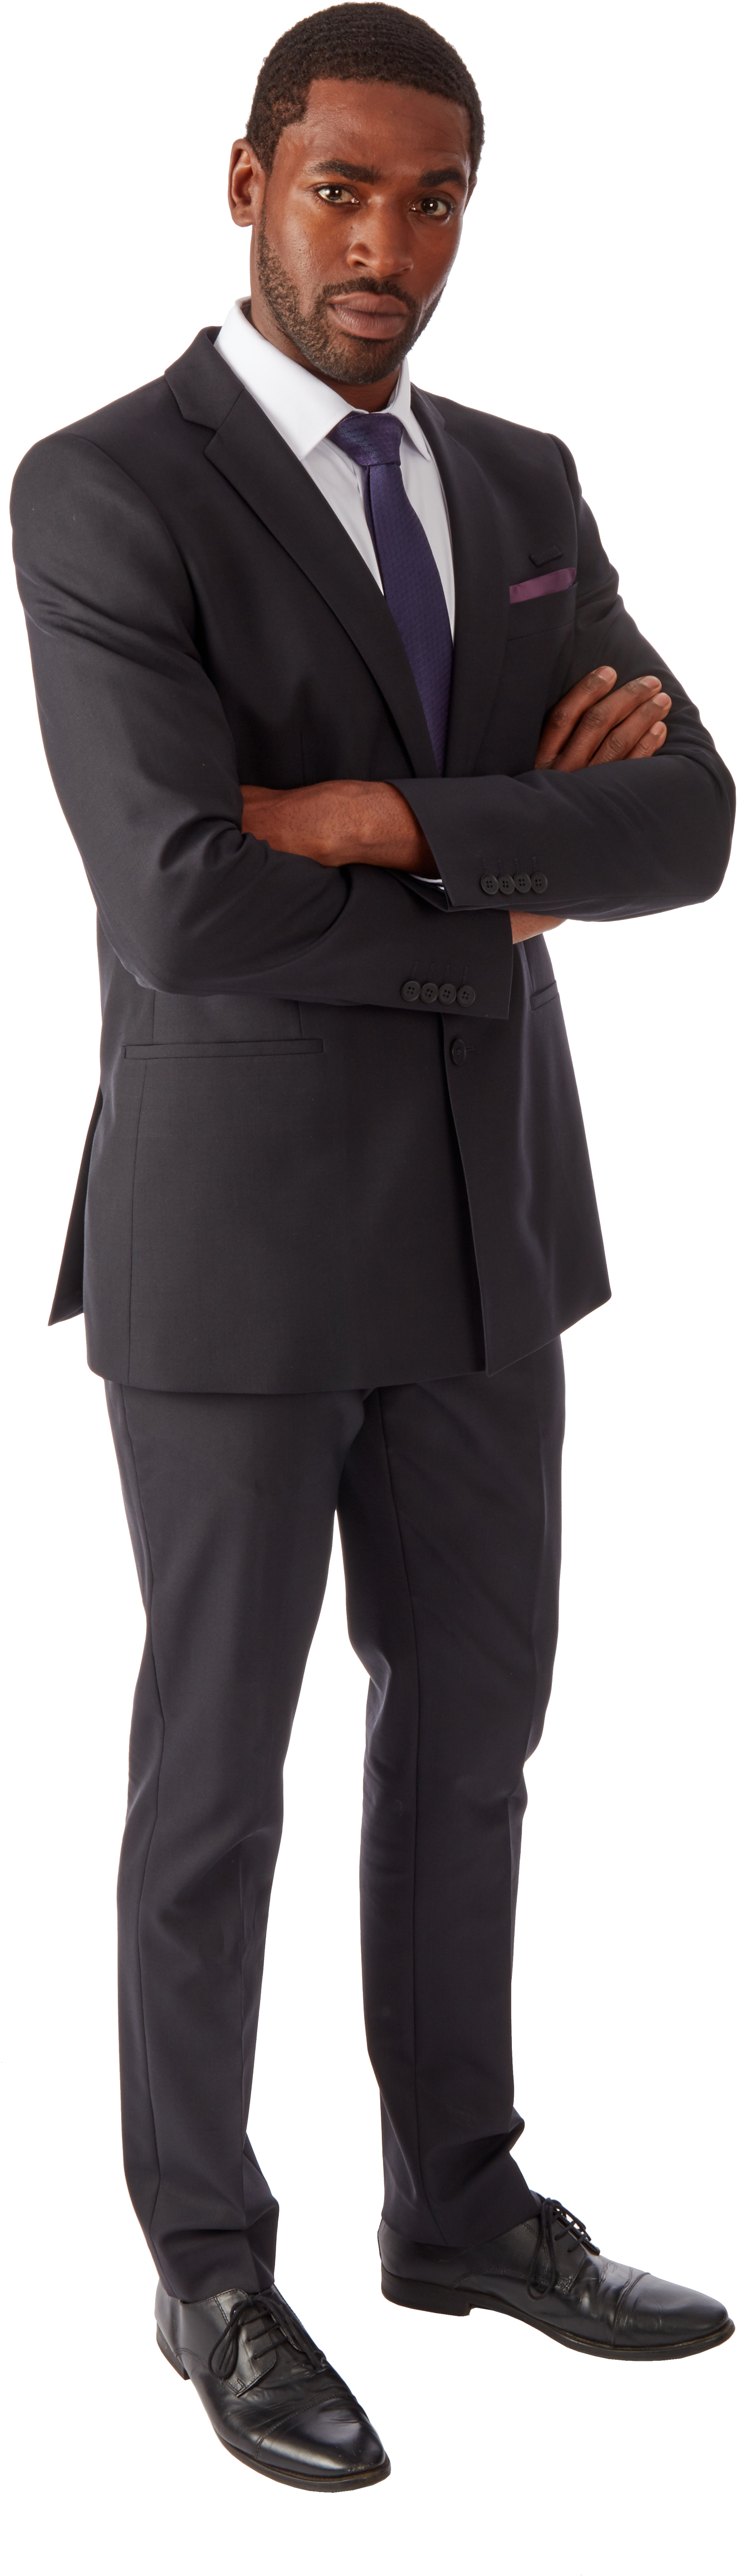 Professional Man In Black Suit PNG